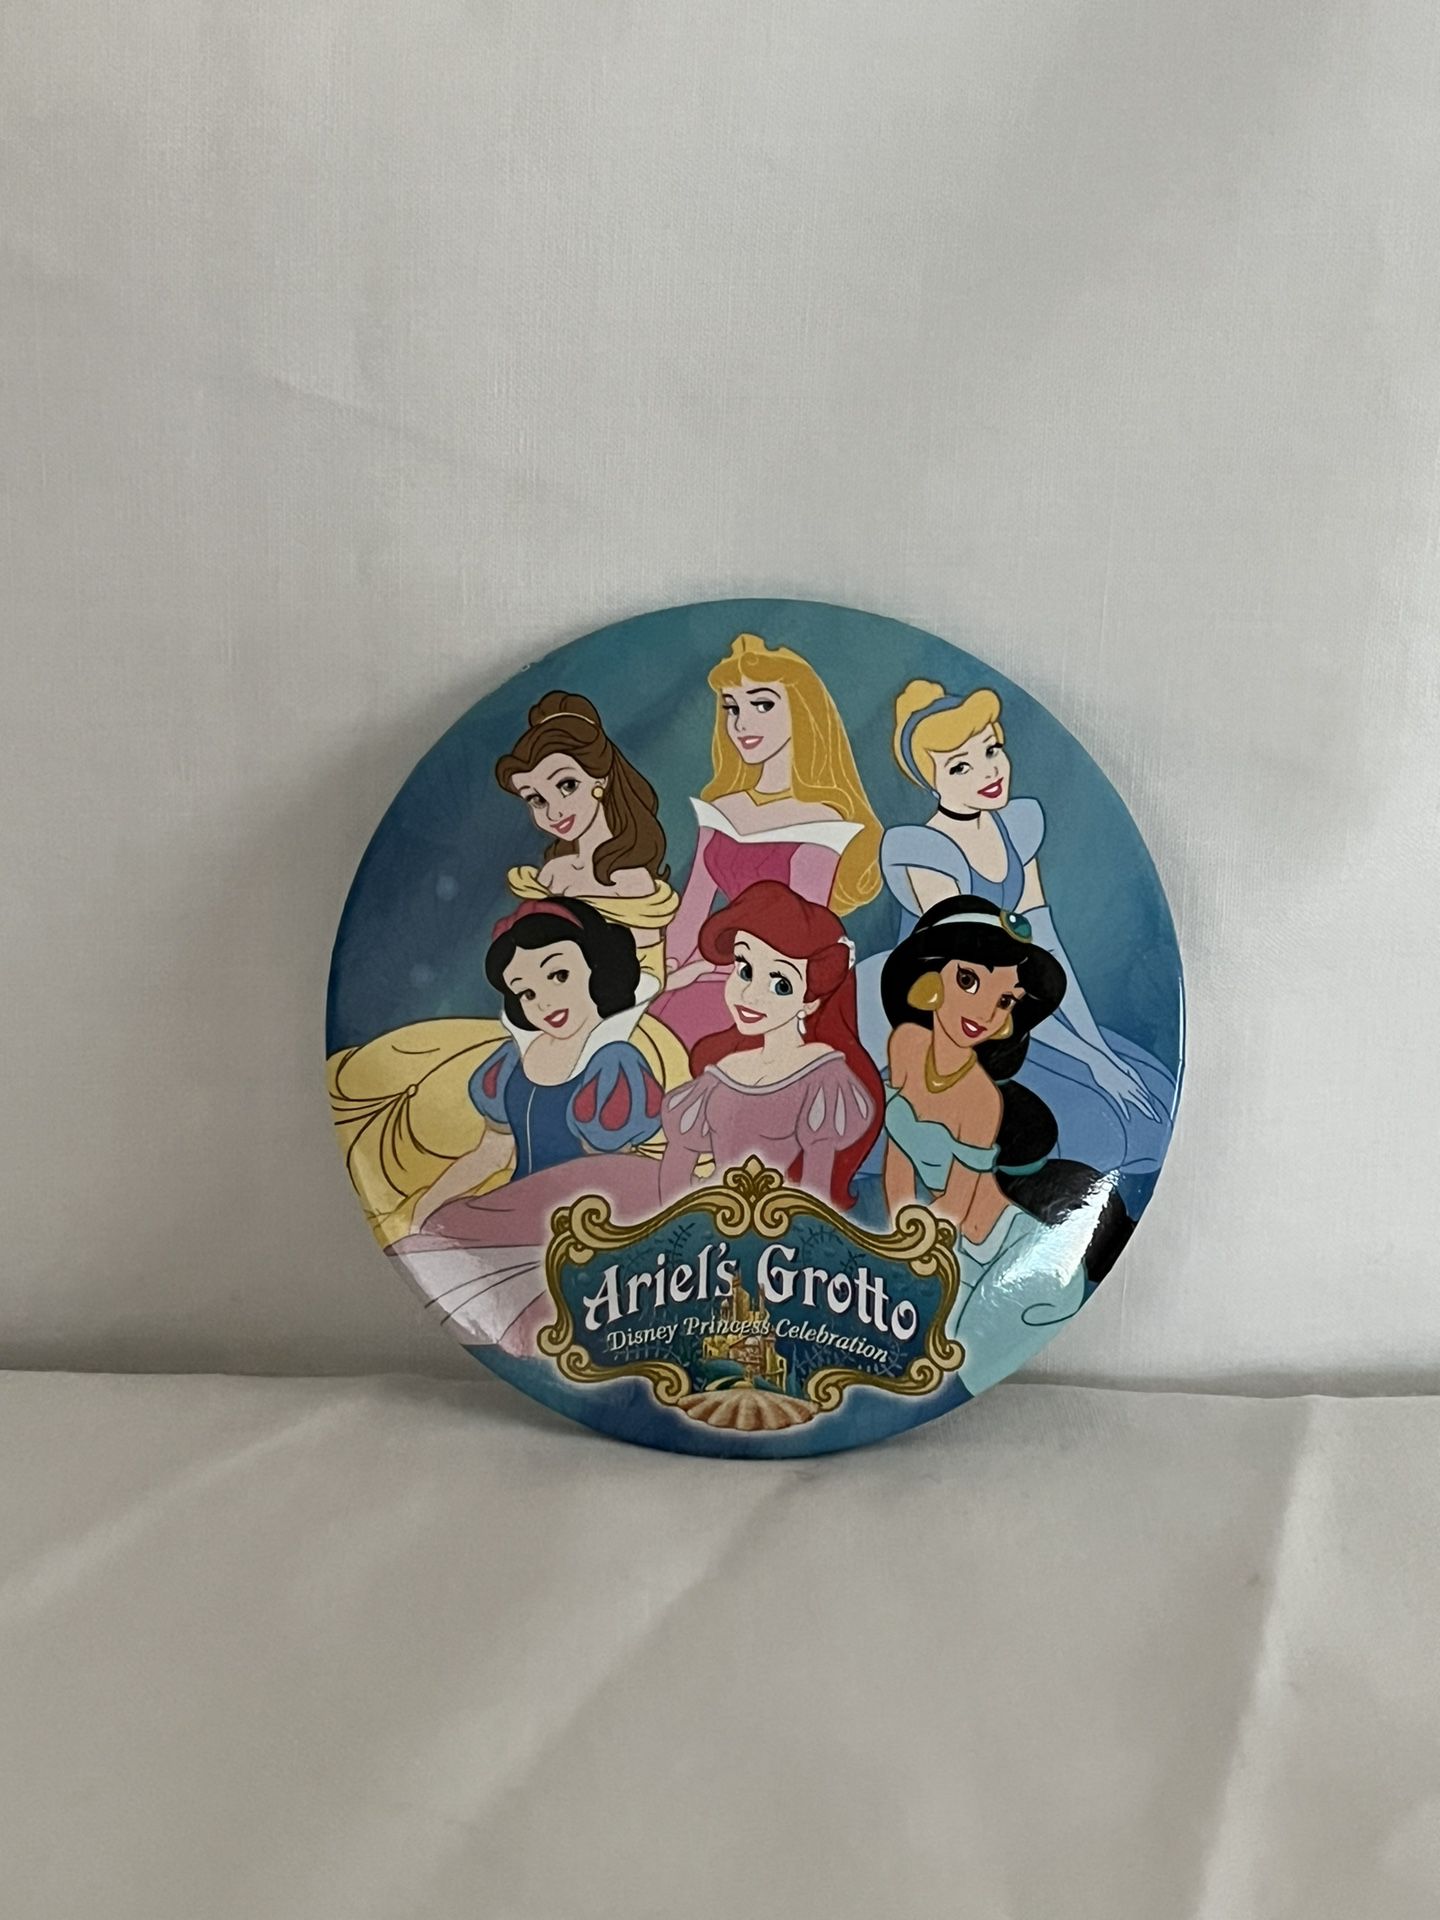 Disney aerial grotto, princess celebration, stick pin on back to pin it to your clothes or whatever you’d like to pin it to   